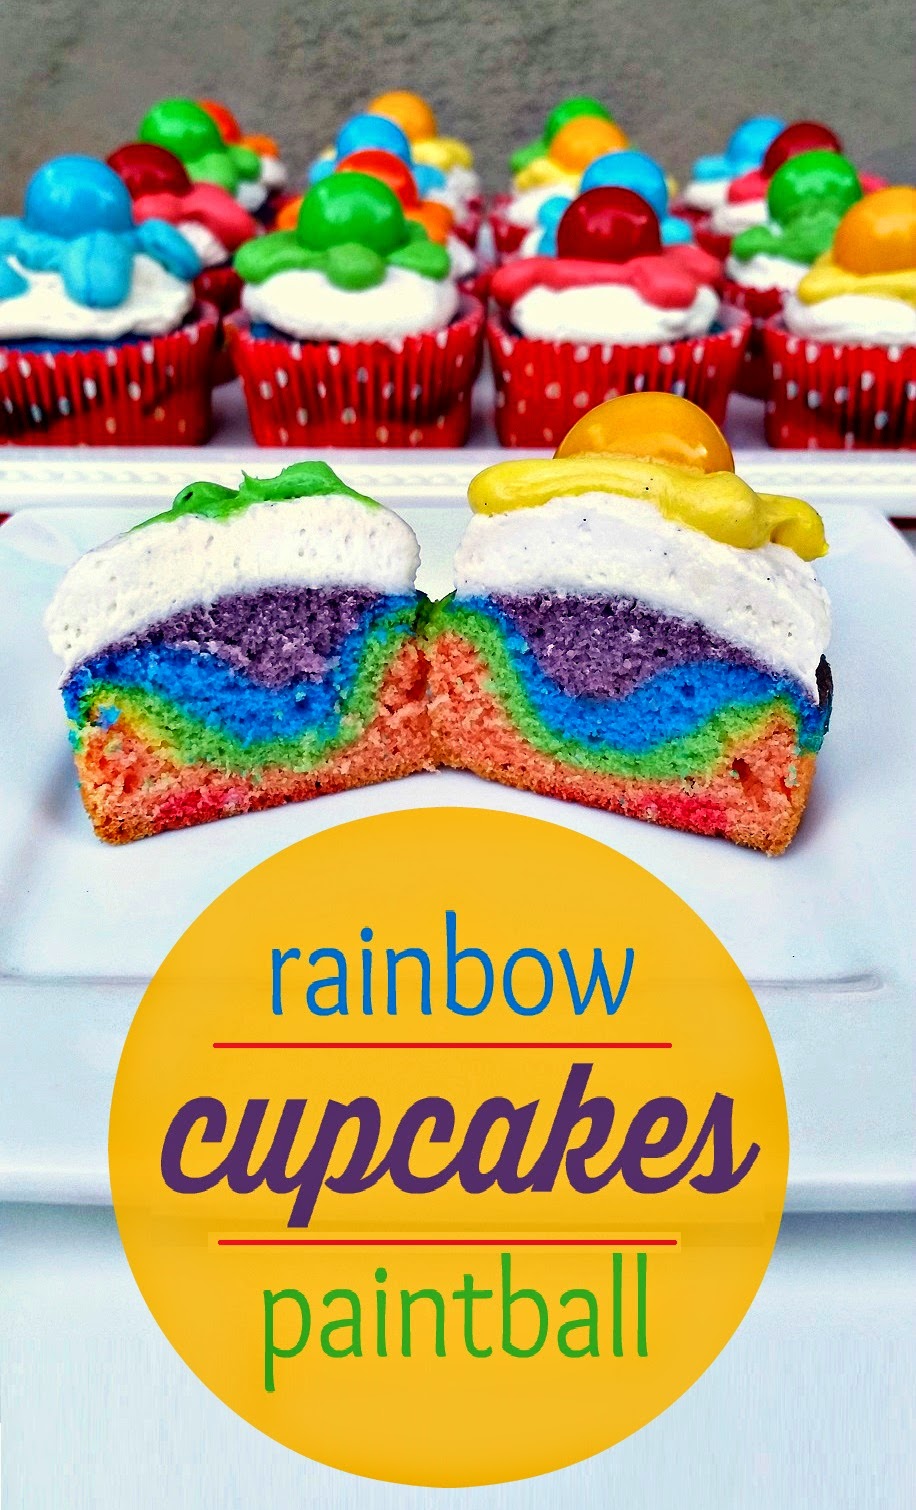 rainbow cupcakes for a paintball party